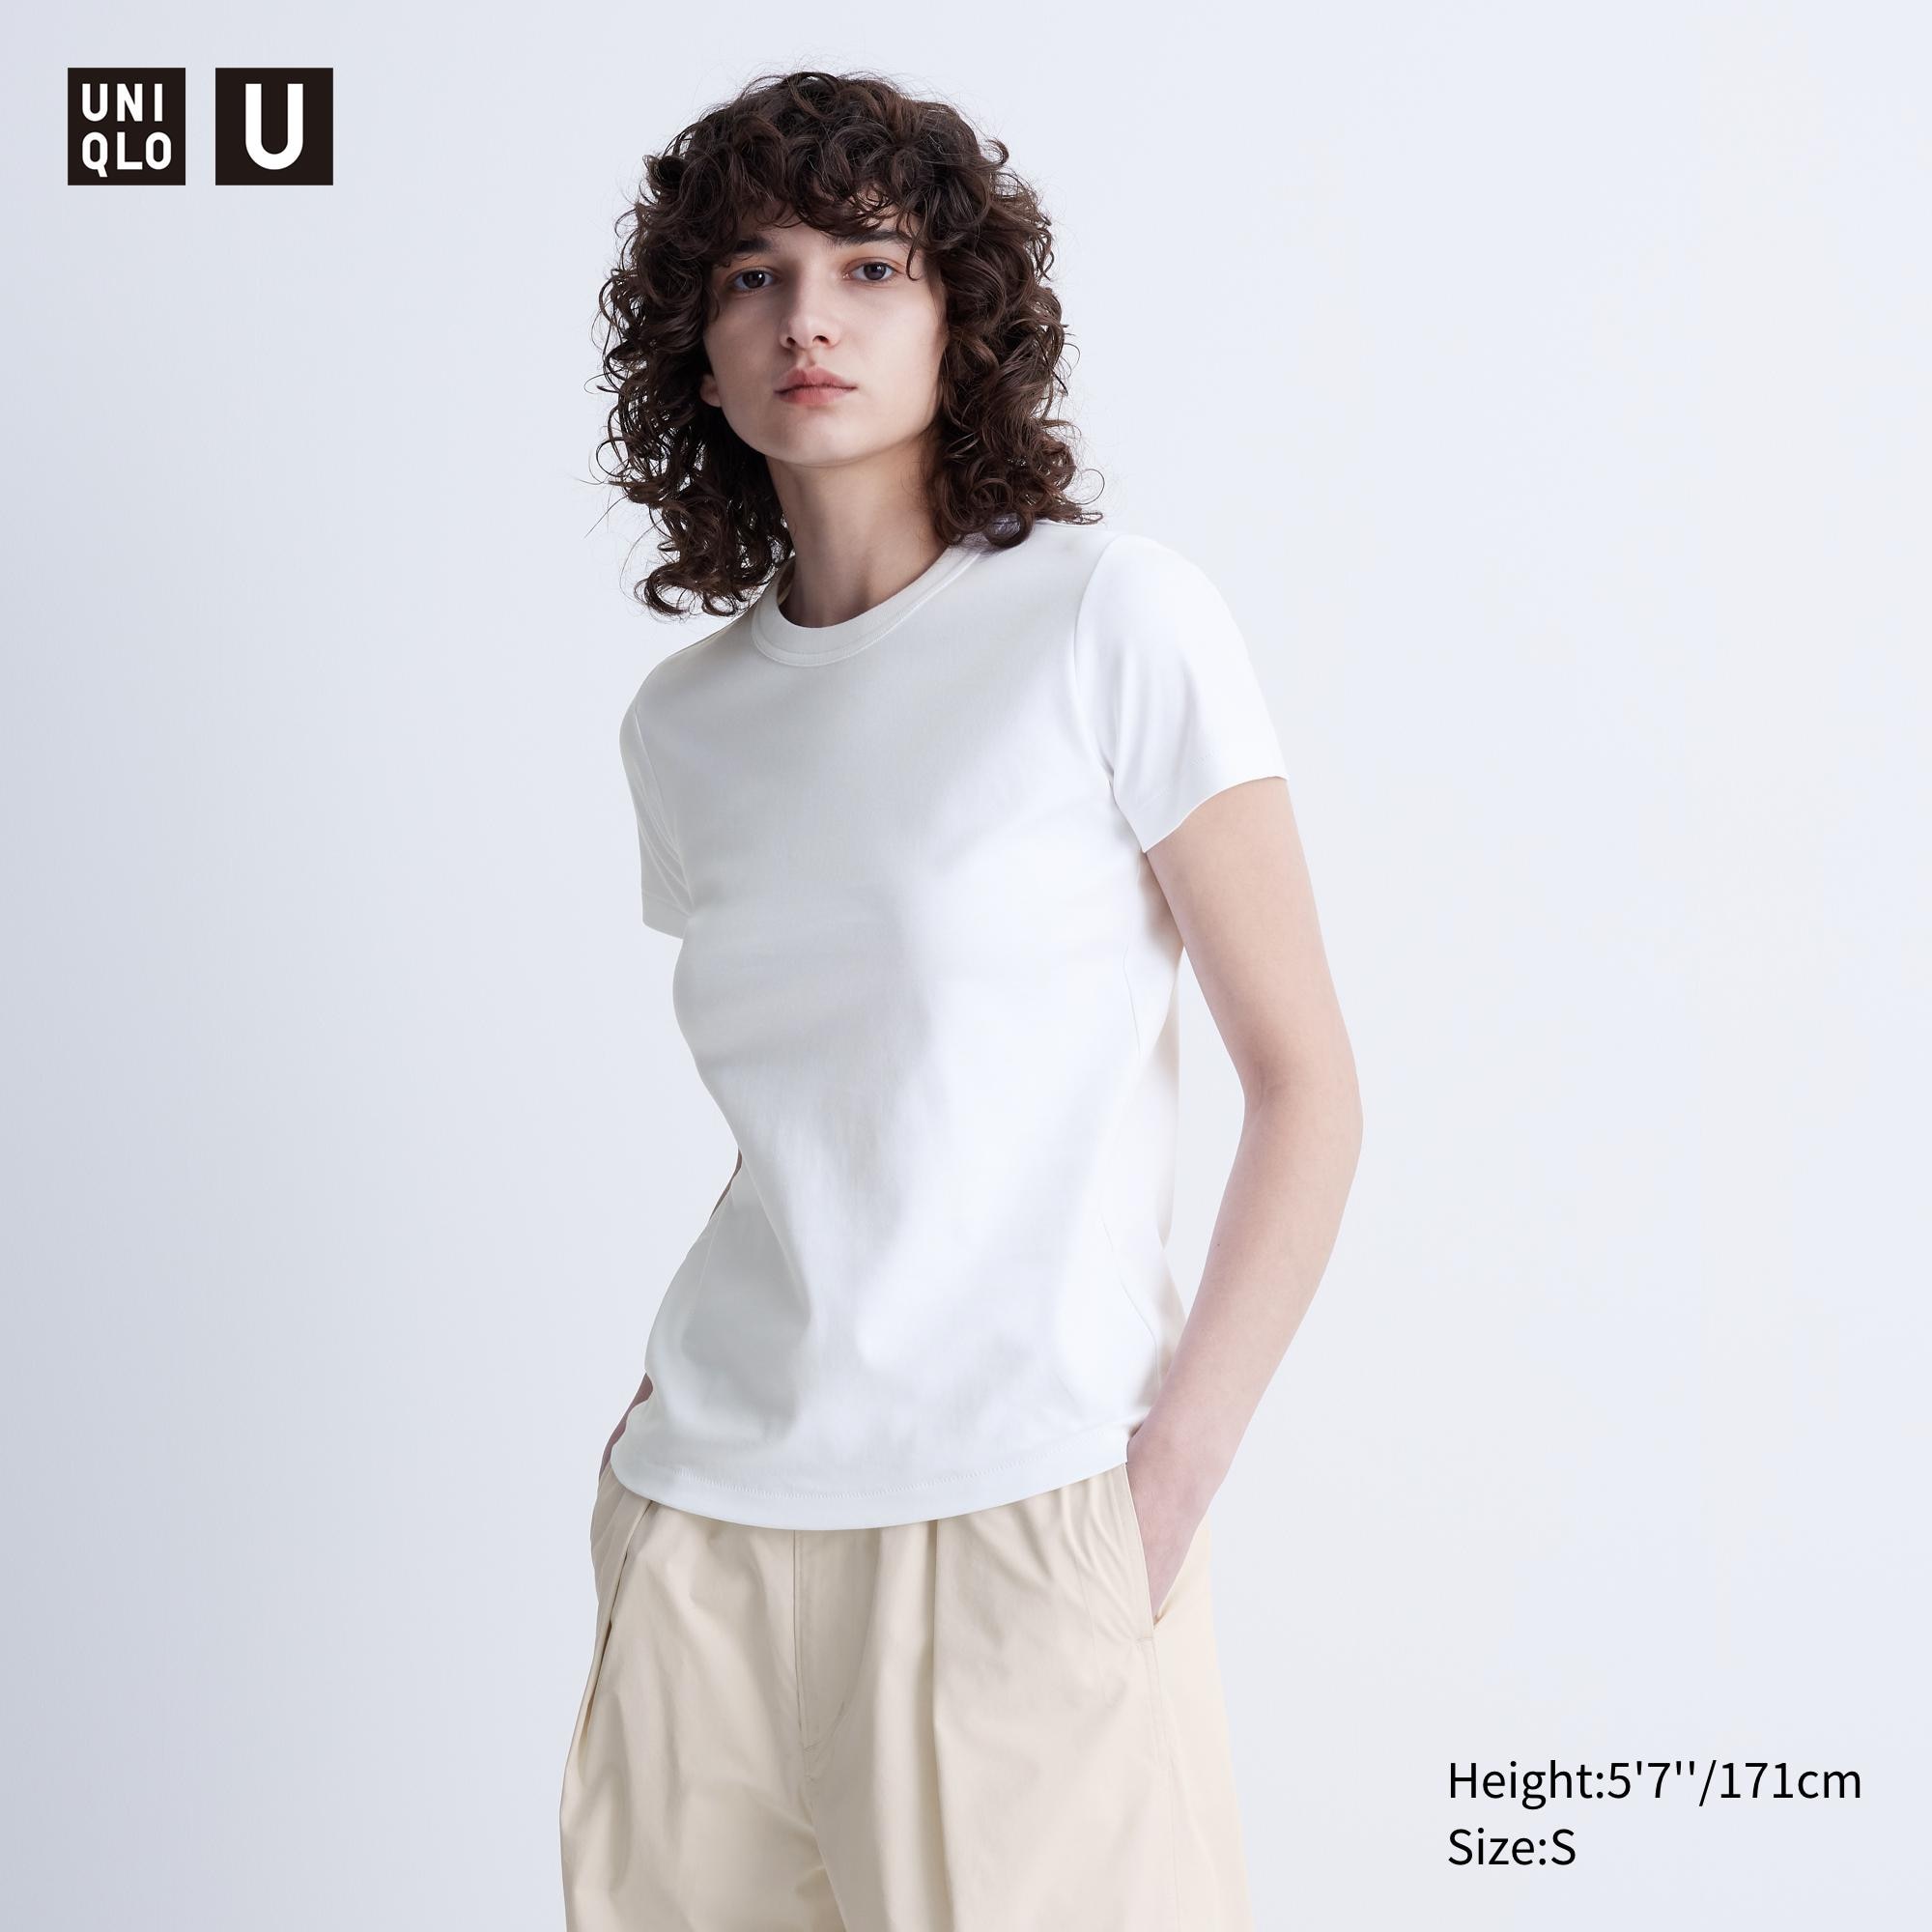 A 20 Uniqlo Bag Named Hottest Product of 2023 After Going Viral  Glamour